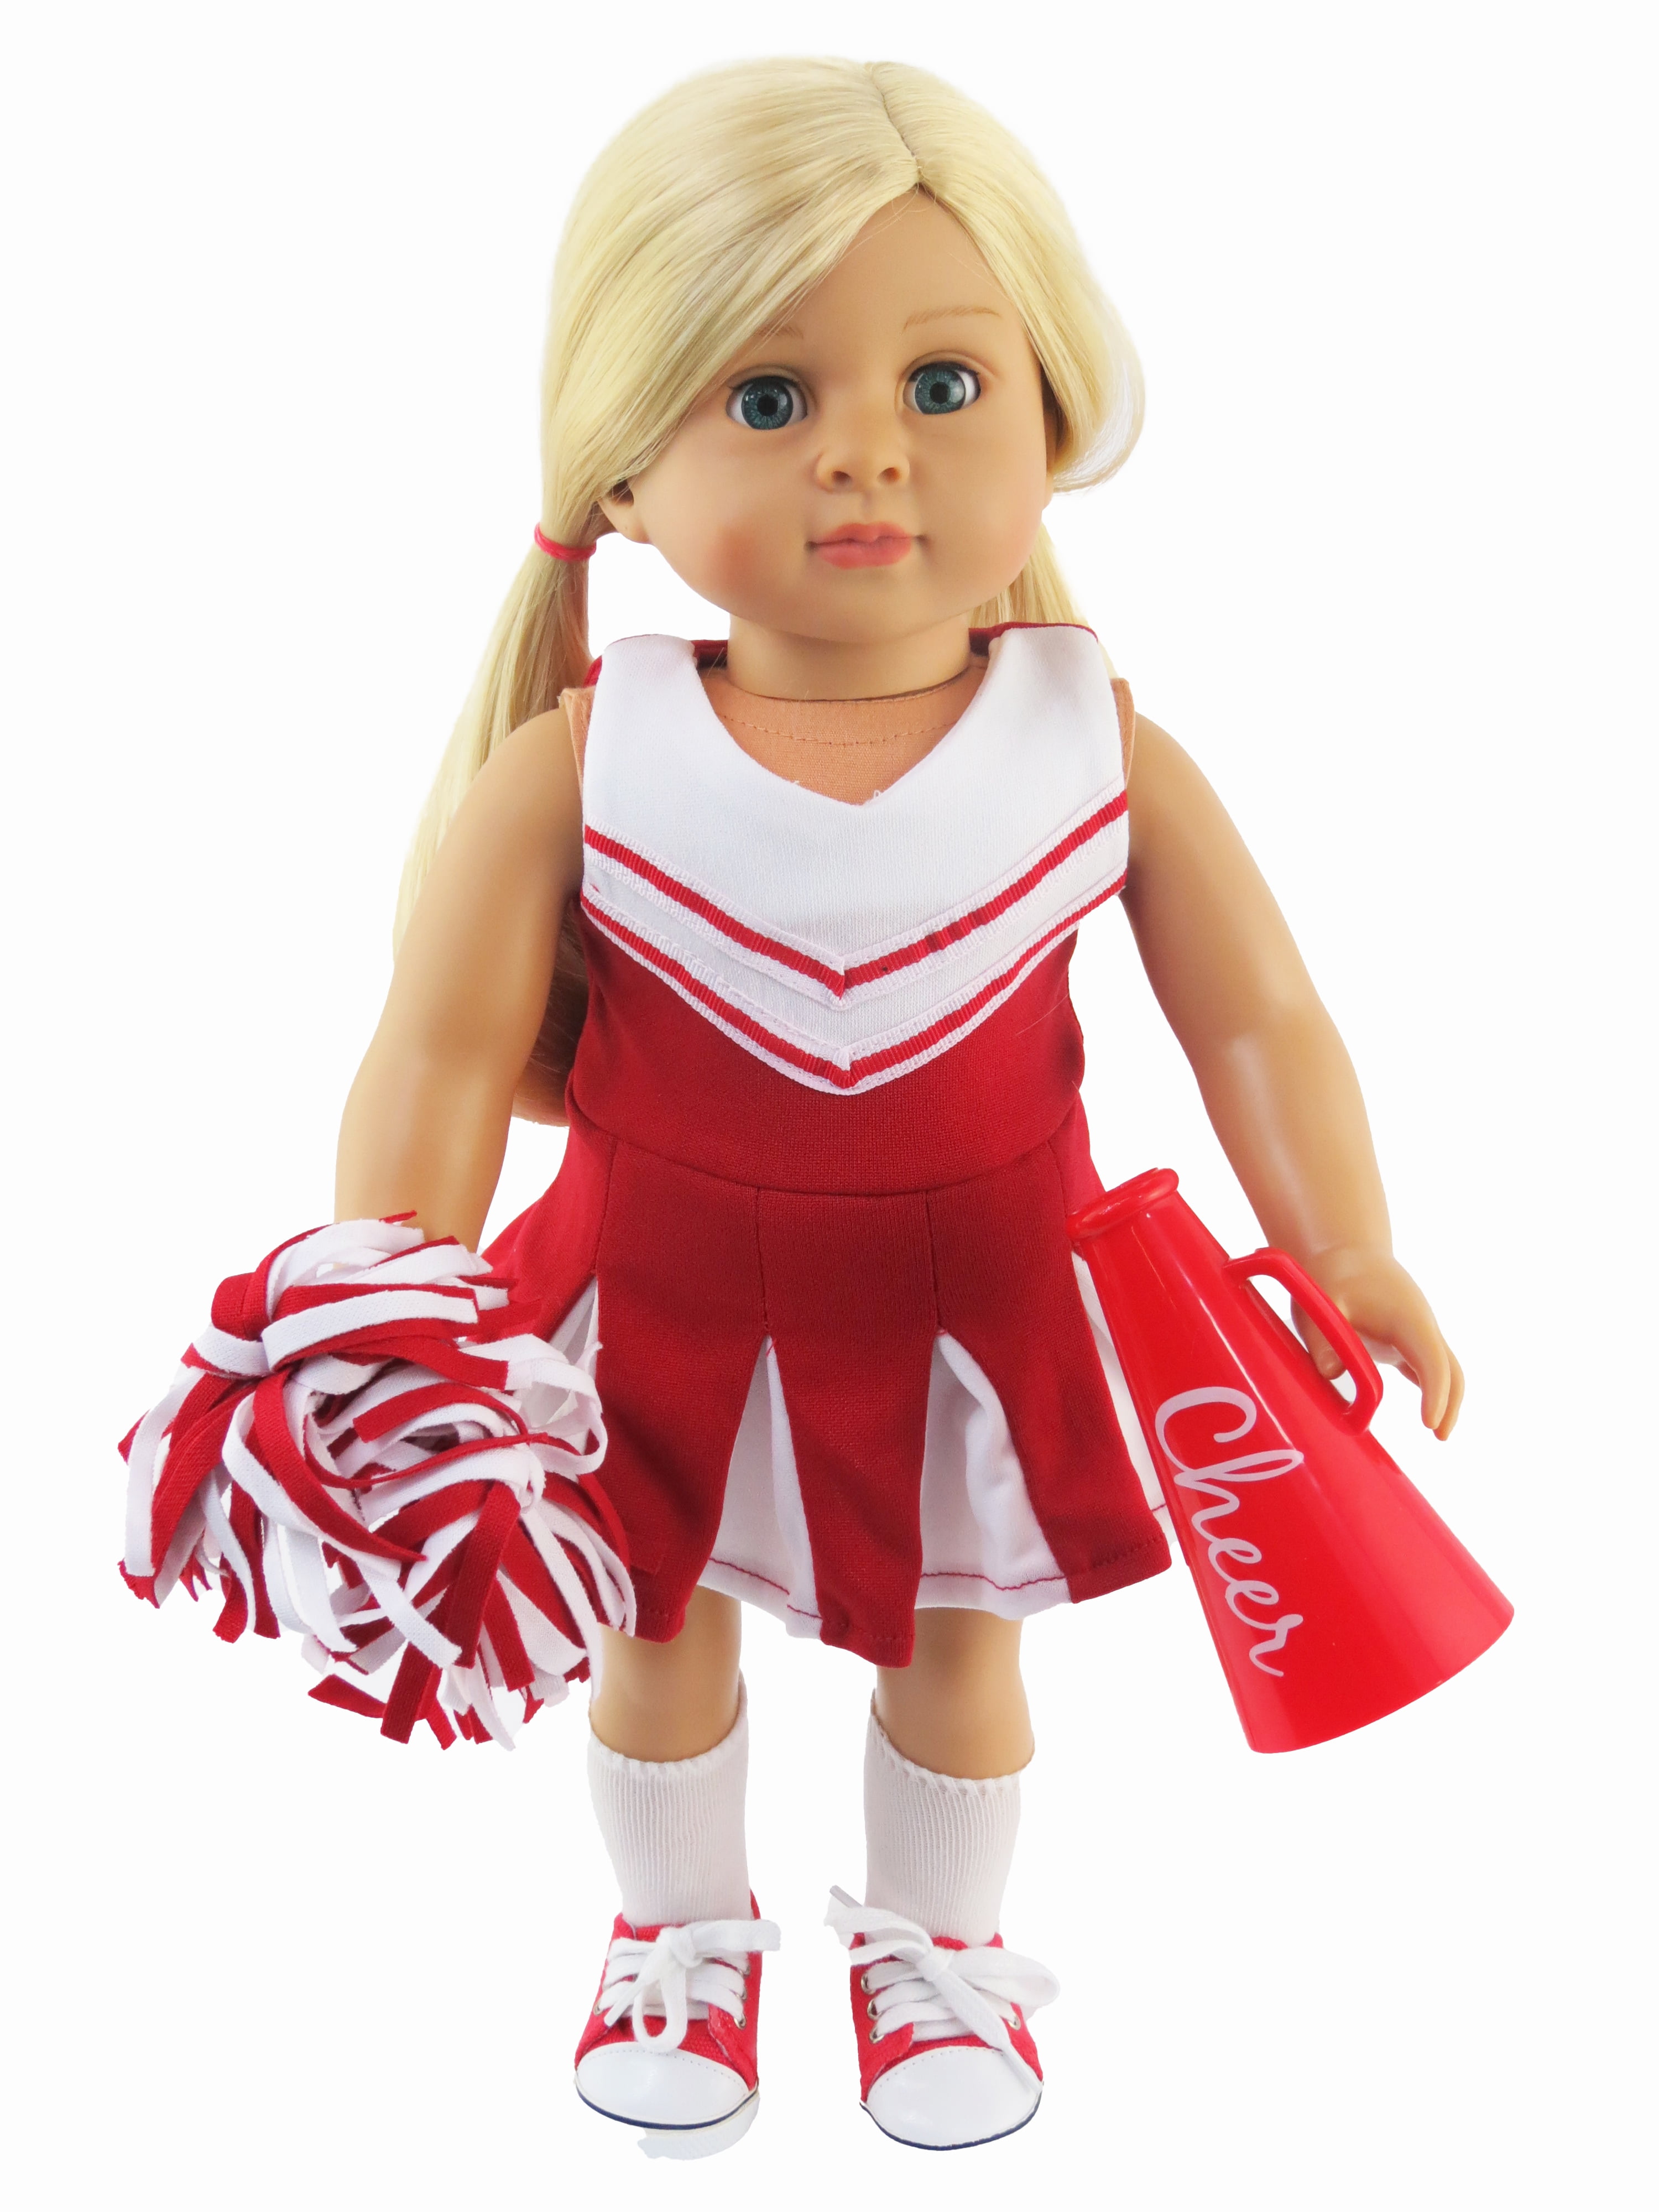 Doll Cheerleader Dress Outfit Set with Pom Poms Plus Megaphone Sophia's 18 Inch Doll Cheerleader Clothes by Sophias Fits American Girl Dolls